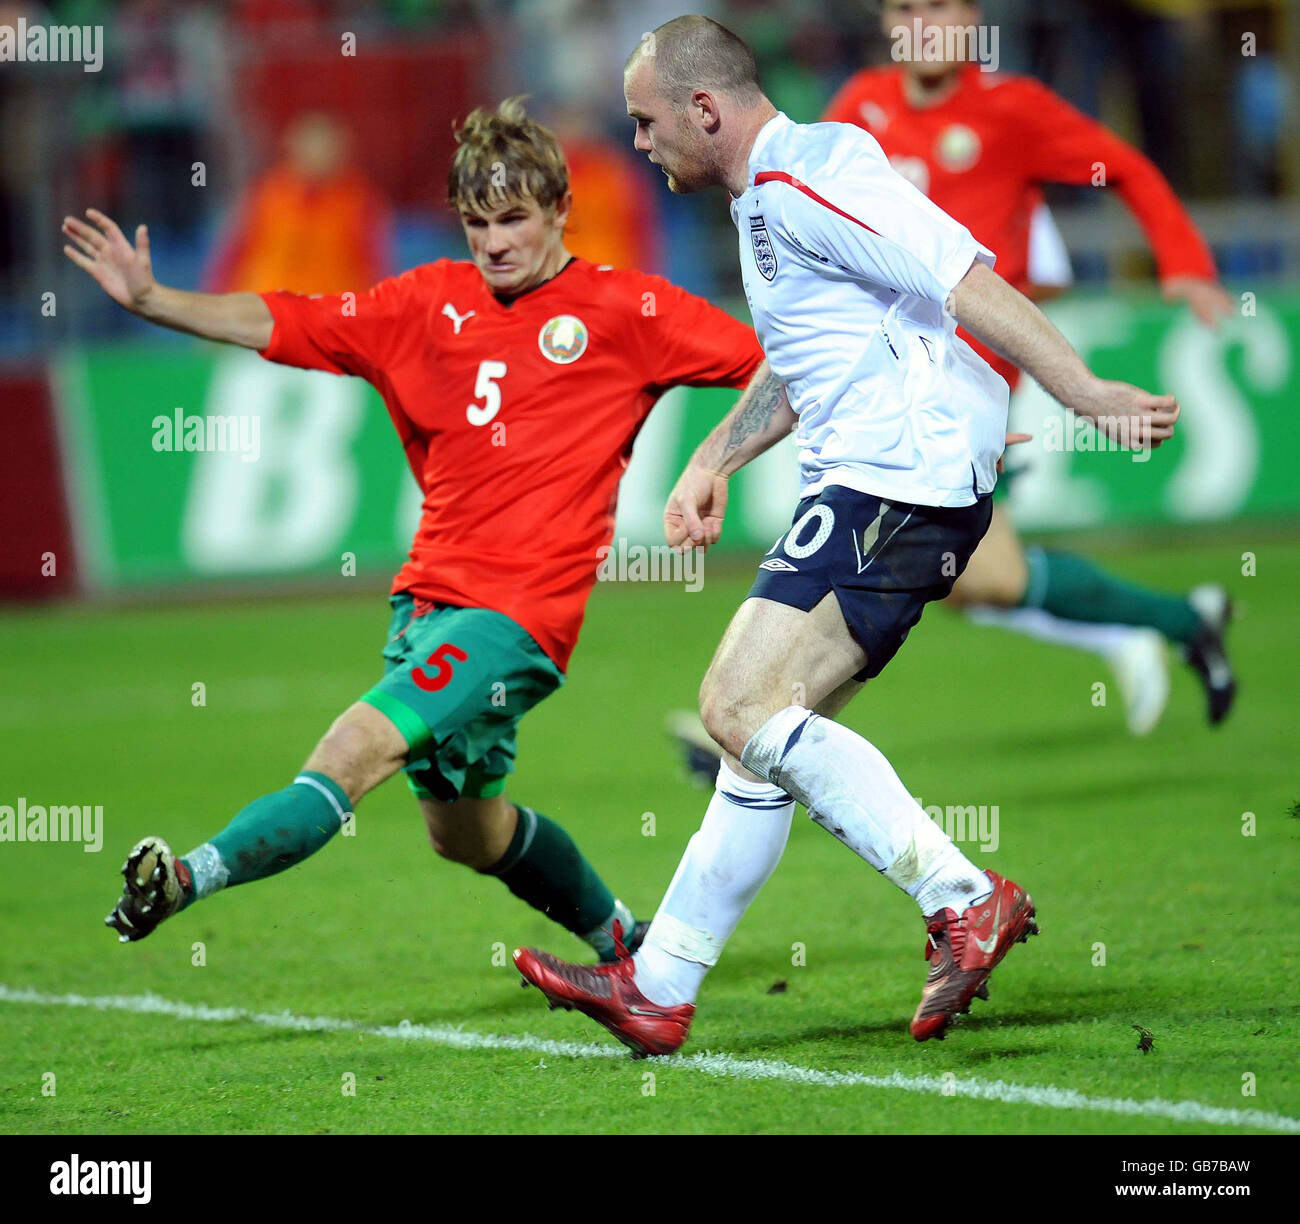 England's Wayne Rooney scores during the FIFA World Cup Qualifying match at the Dinamo Stadium, Minsk, Belarus. Stock Photo